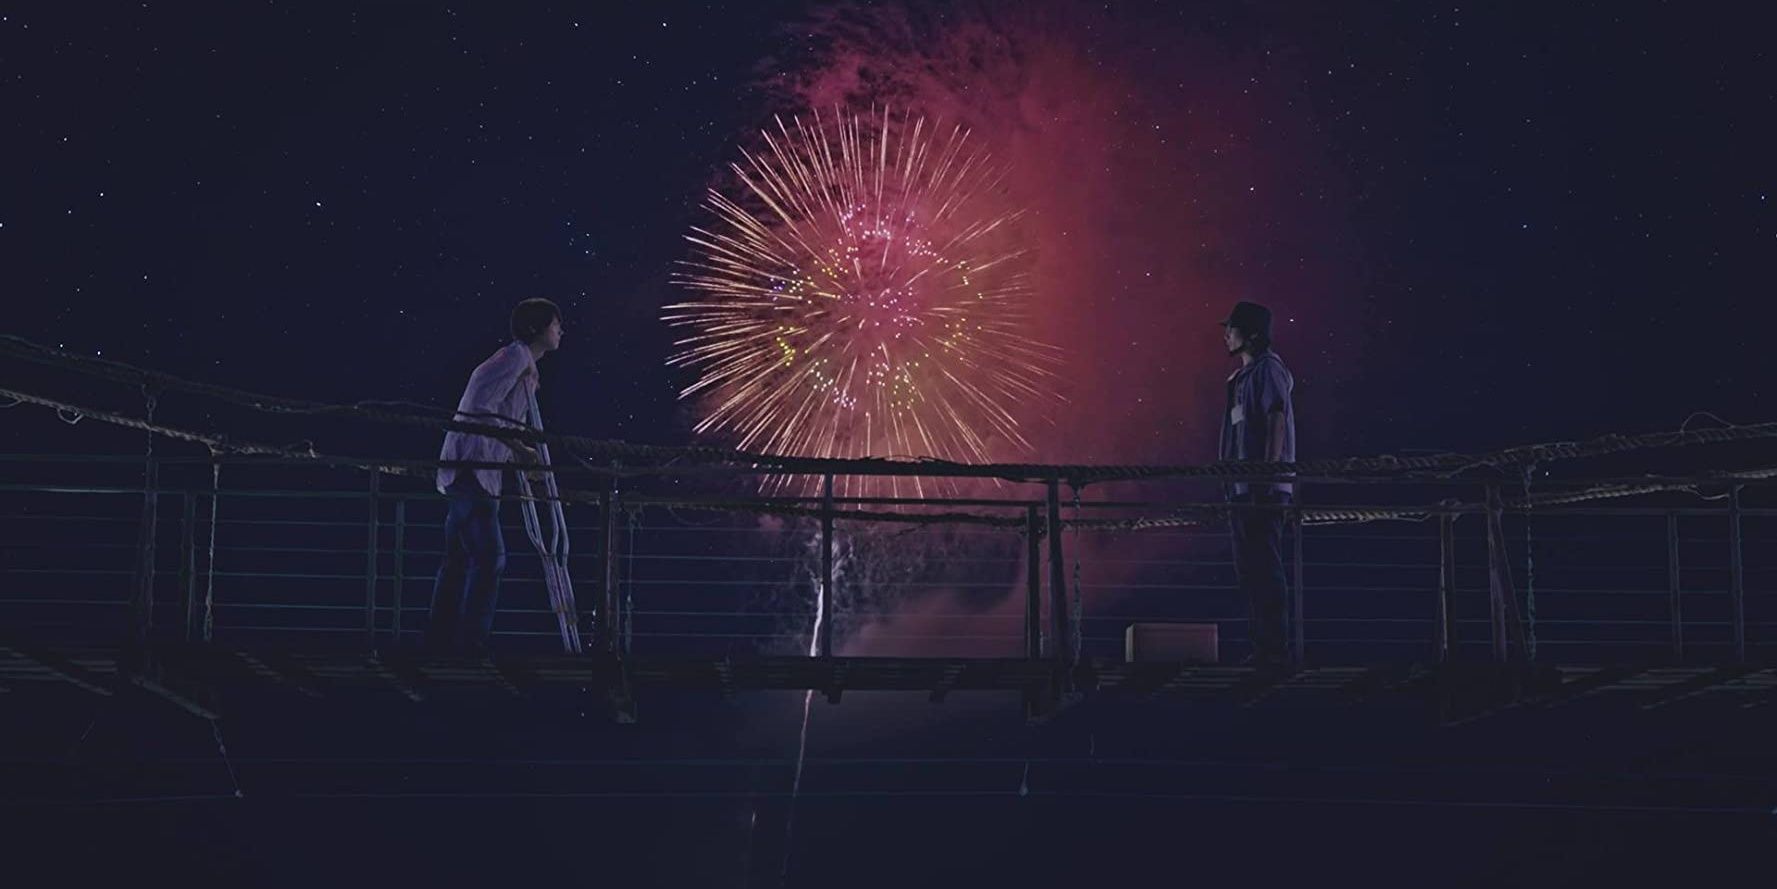 A firework explodes behind two people on a bridge